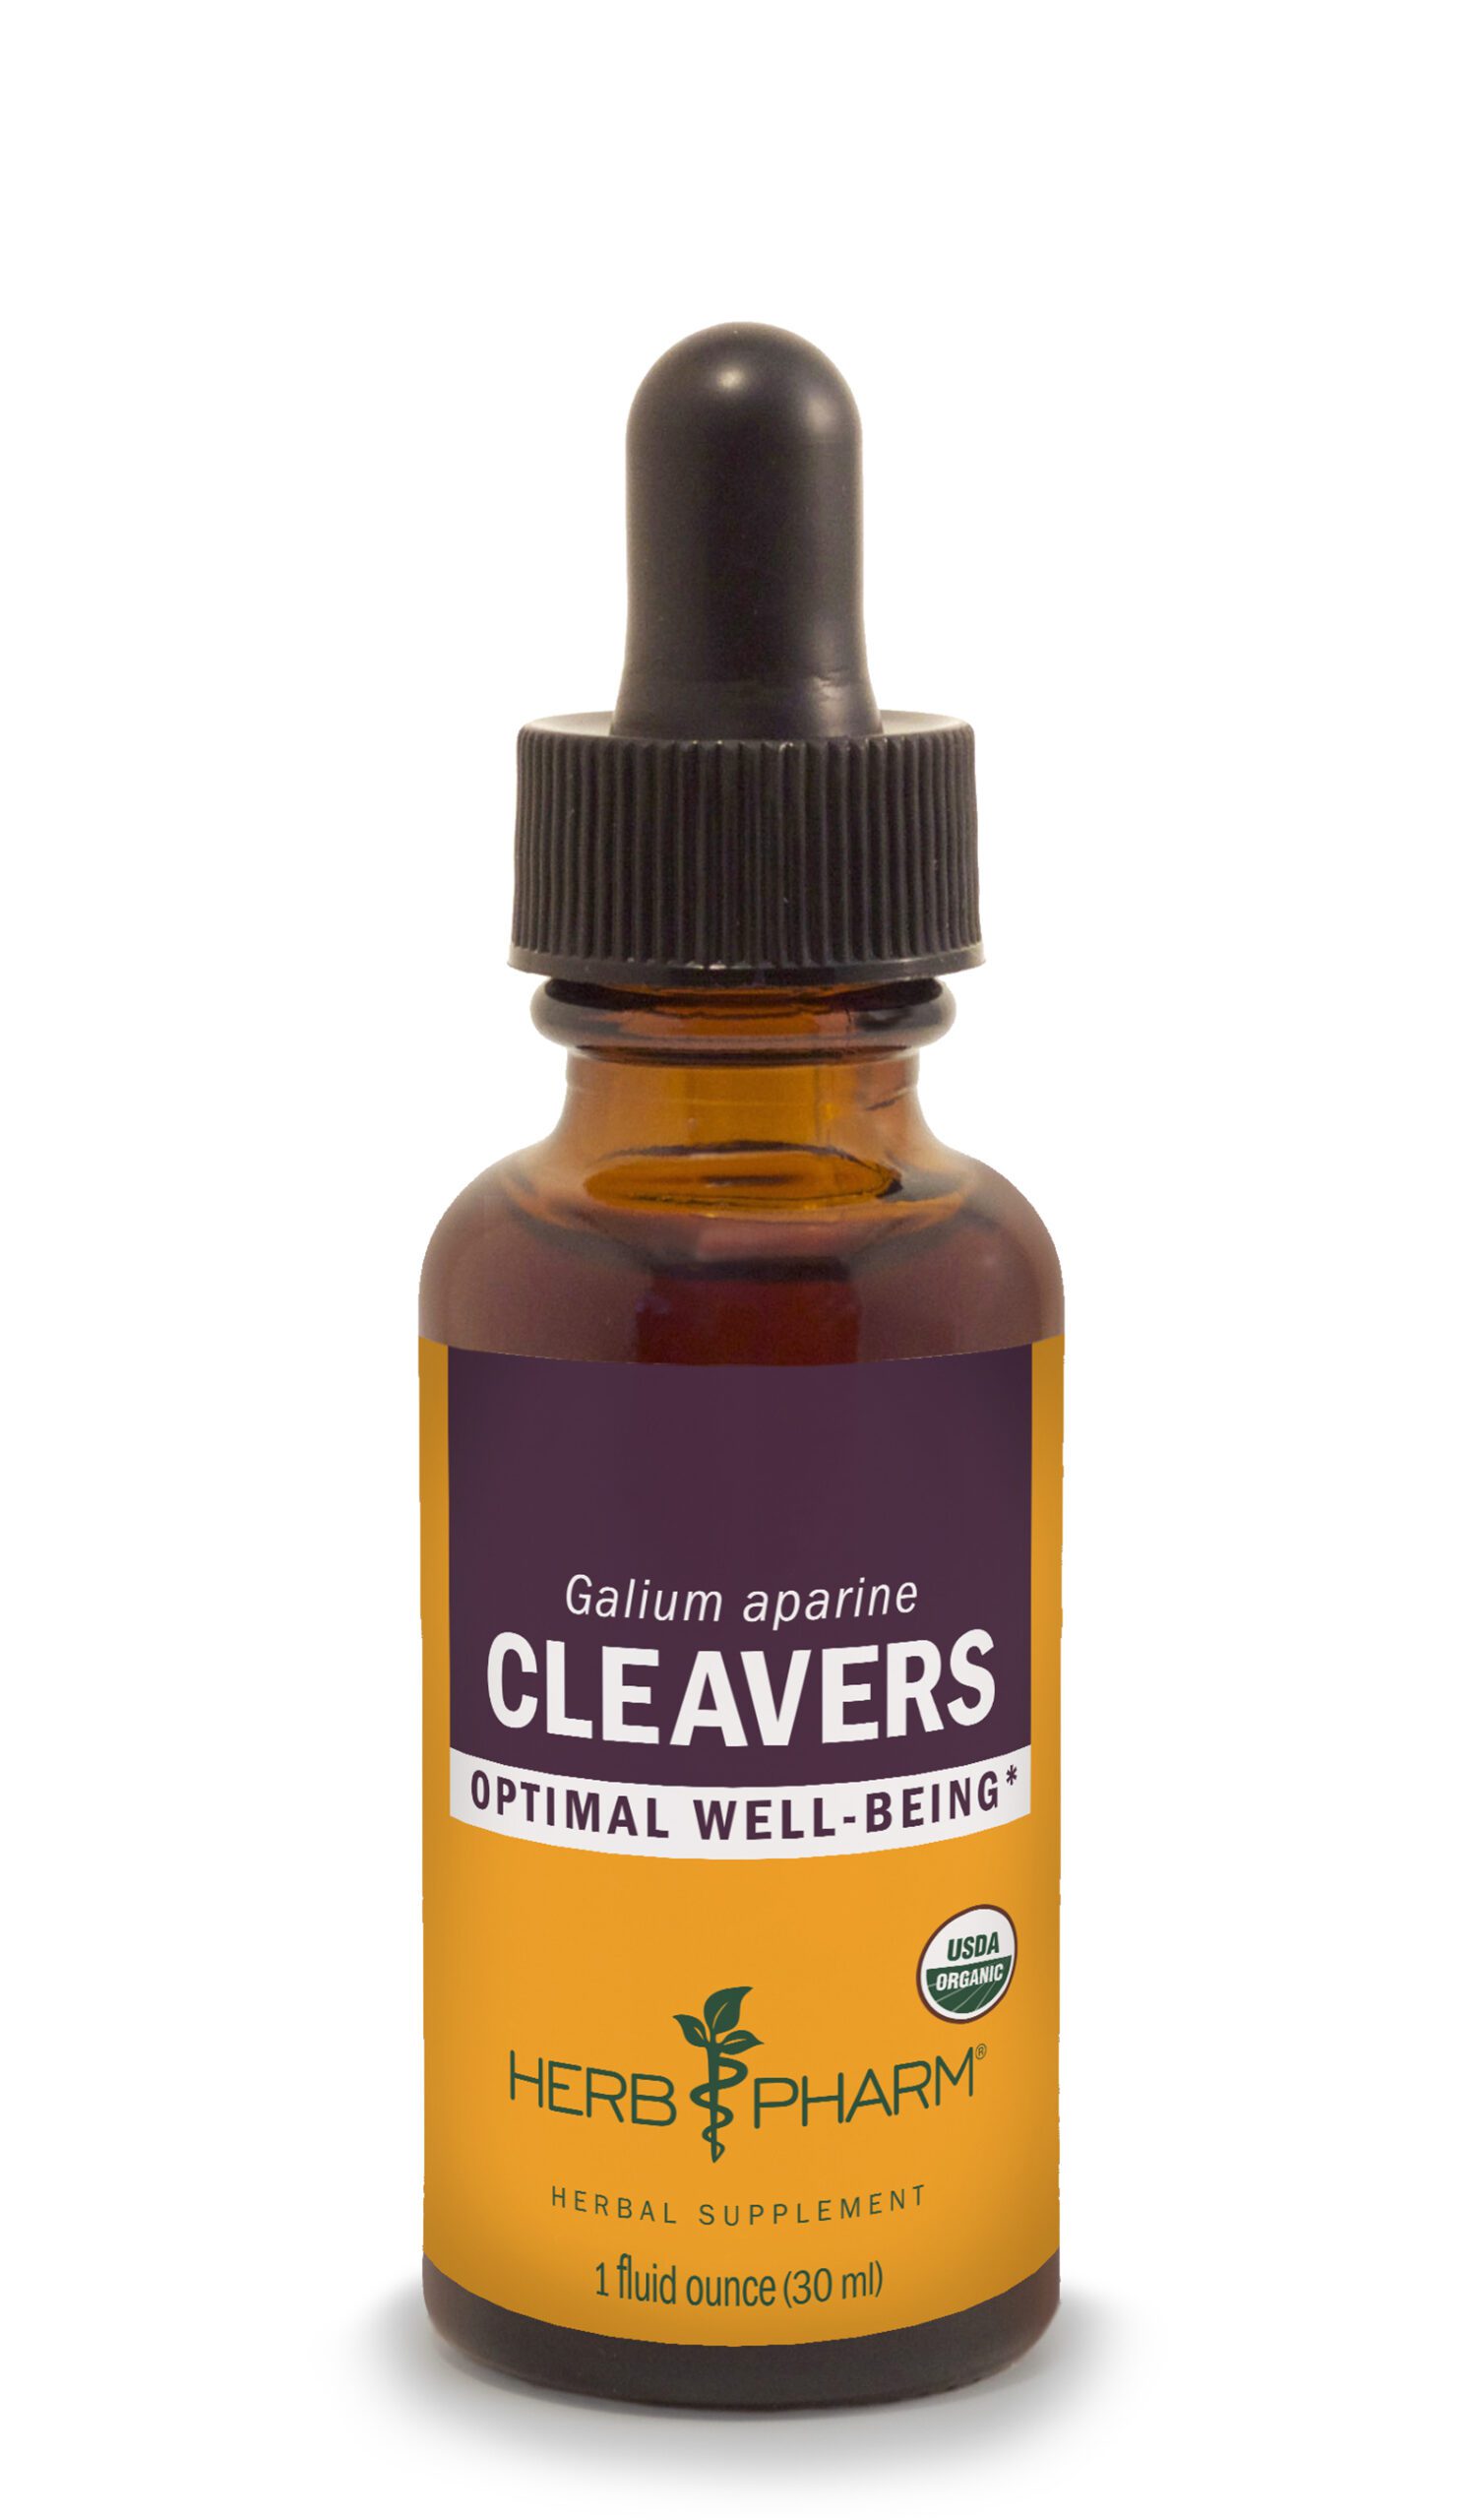 Product Listing Image for Herb Pharm Cleavers Tincture 1oz